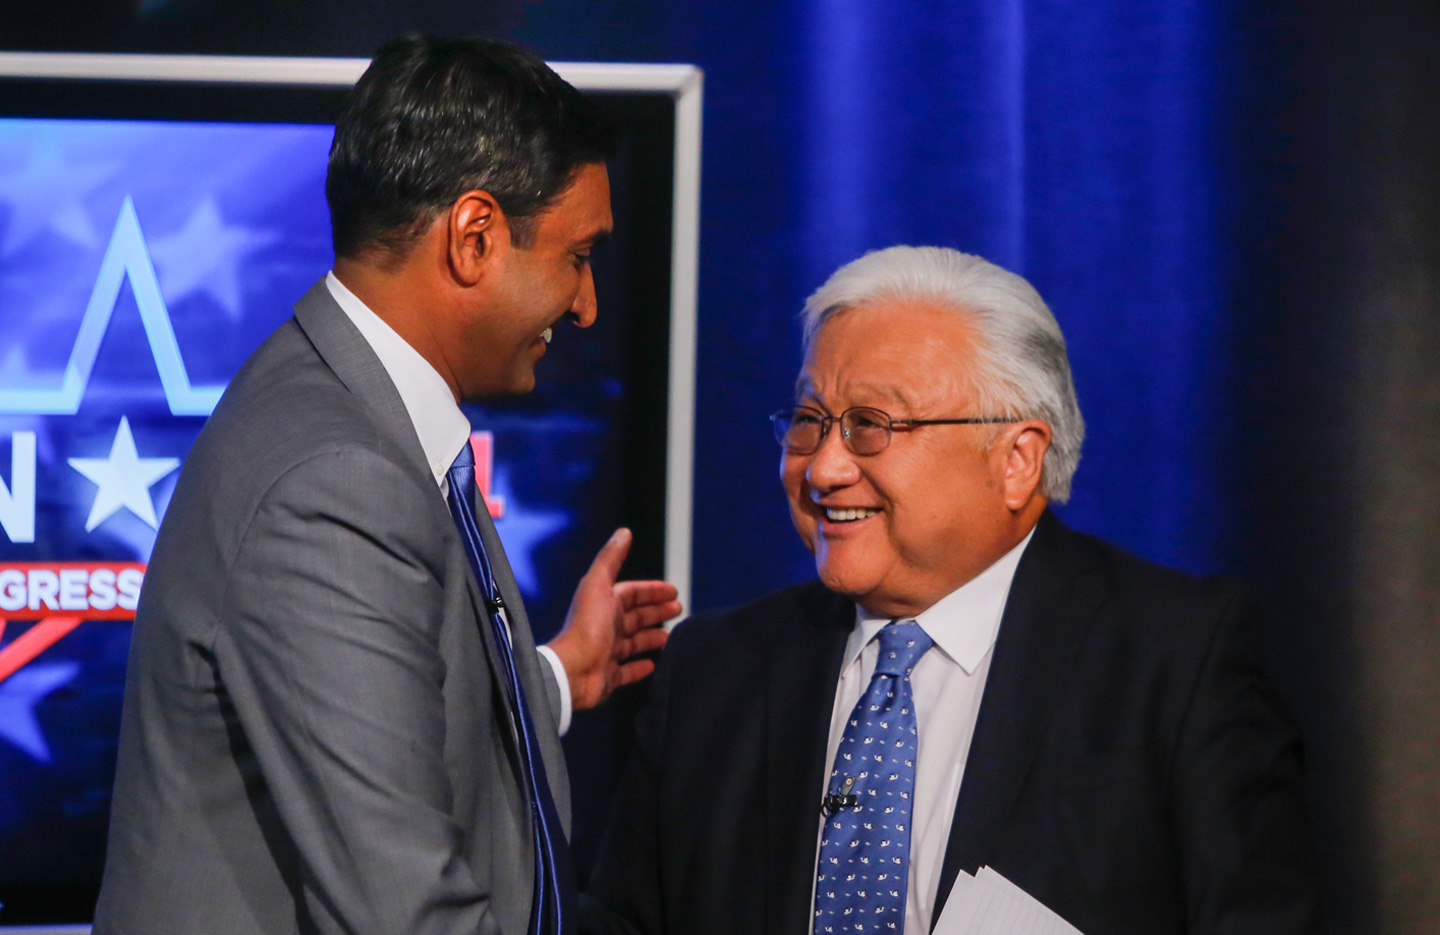 The final clash for Silicon Valley between Rep. Mike Honda and Ro Khanna